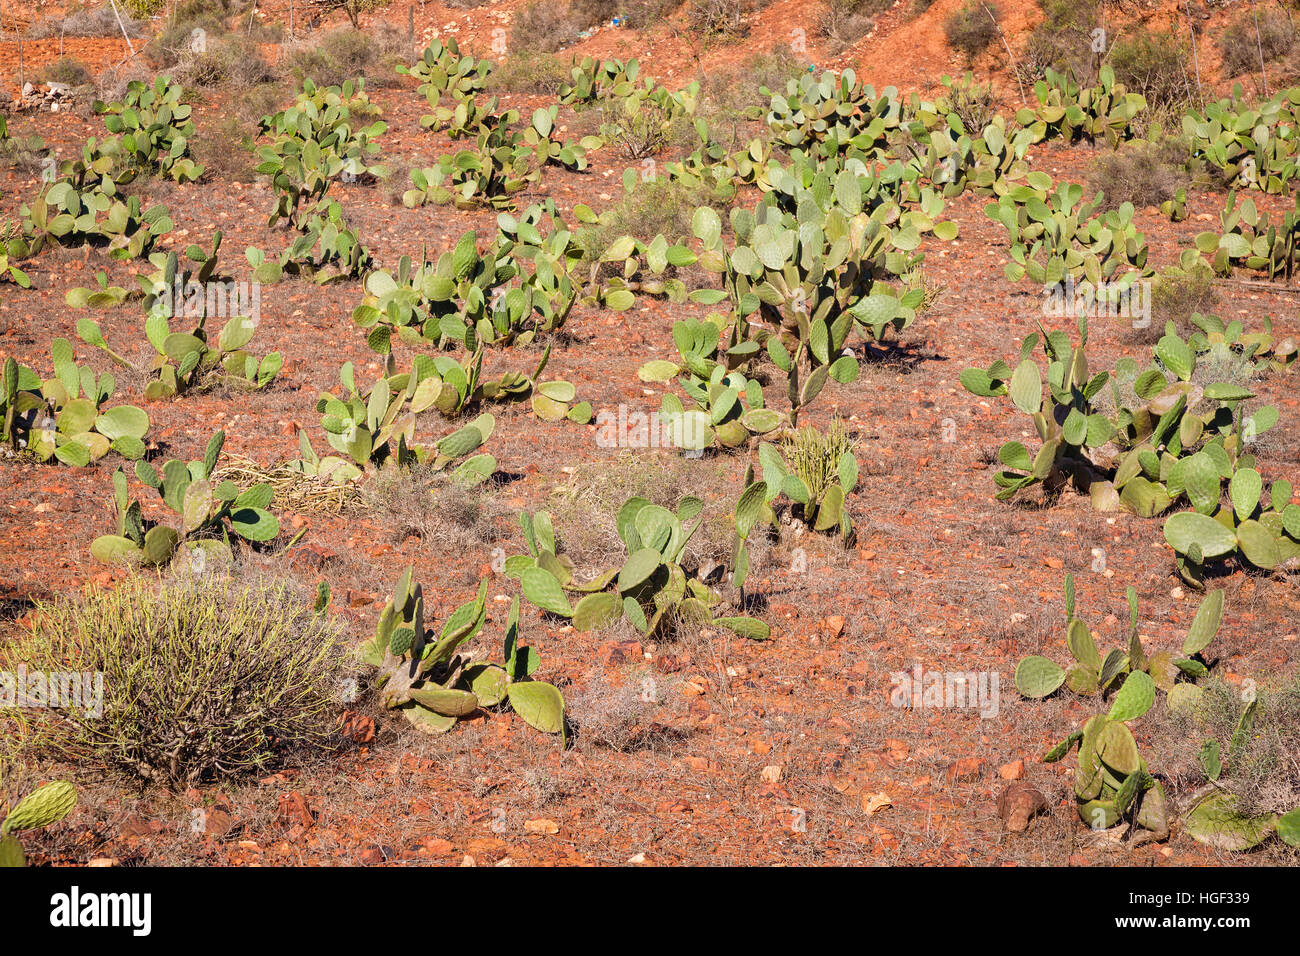 Growing prickly pear over Sidi Ifni in the southwestern part of Morocco Stock Photo